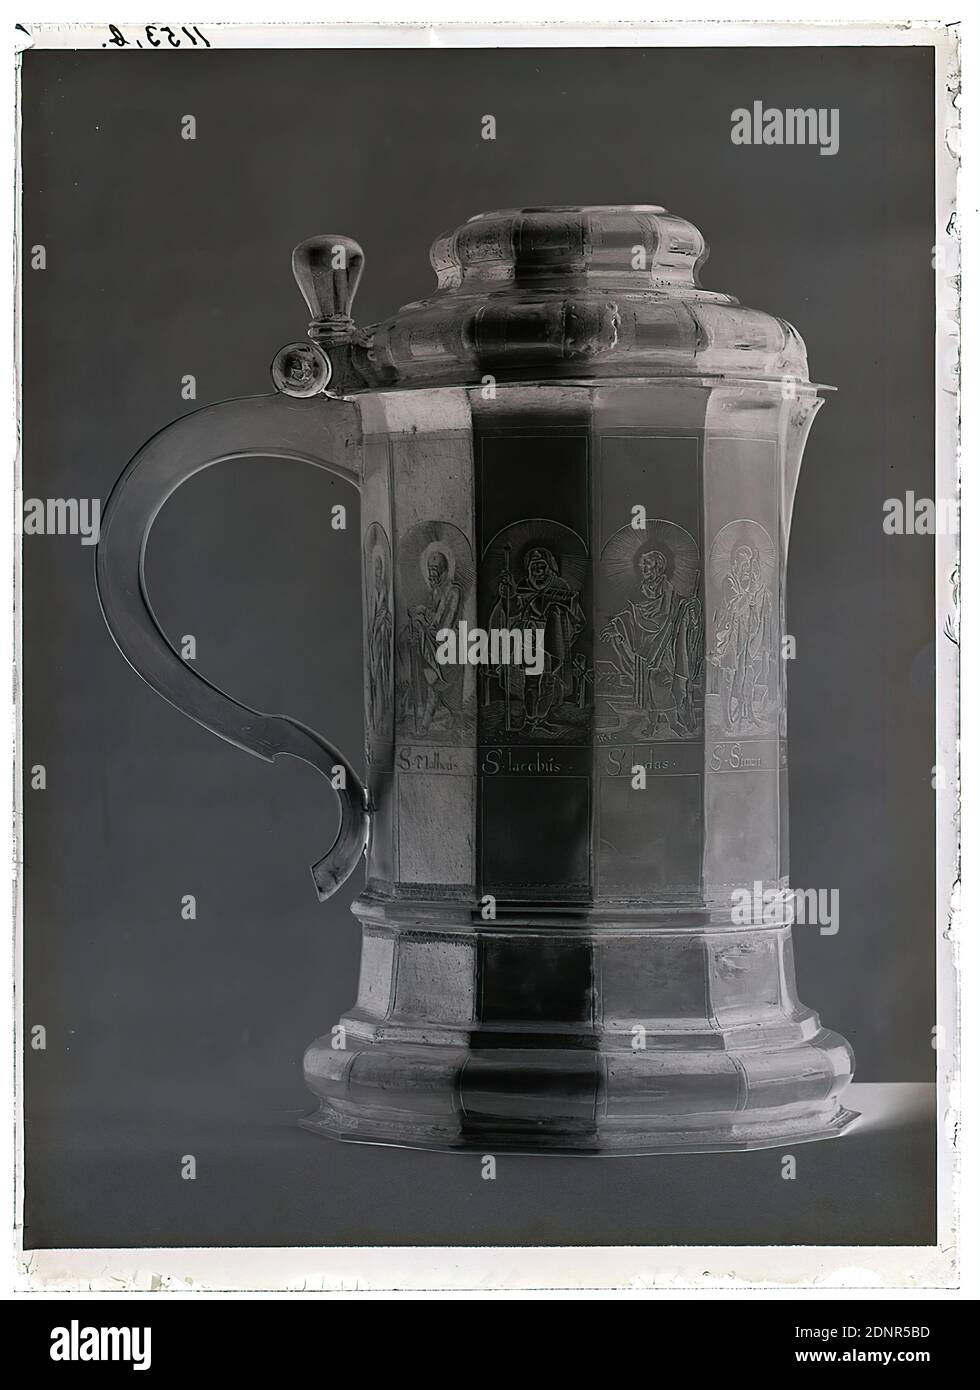 Wilhelm Weimar, jug, glass negative, black and white negative process, total: height: 23.8 cm; width: 17.8 cm, numbered: top left. : in black ink: 1153,b, apostles, work of applied art (metals), the apostles Judas Thaddaeus, the apostle Simon Zelotes (or Simon of Cana), Matthew, the apostle James the Elder (Major), Jug (drinking vessel), church furnishings, arts and crafts, industrial design Stock Photo